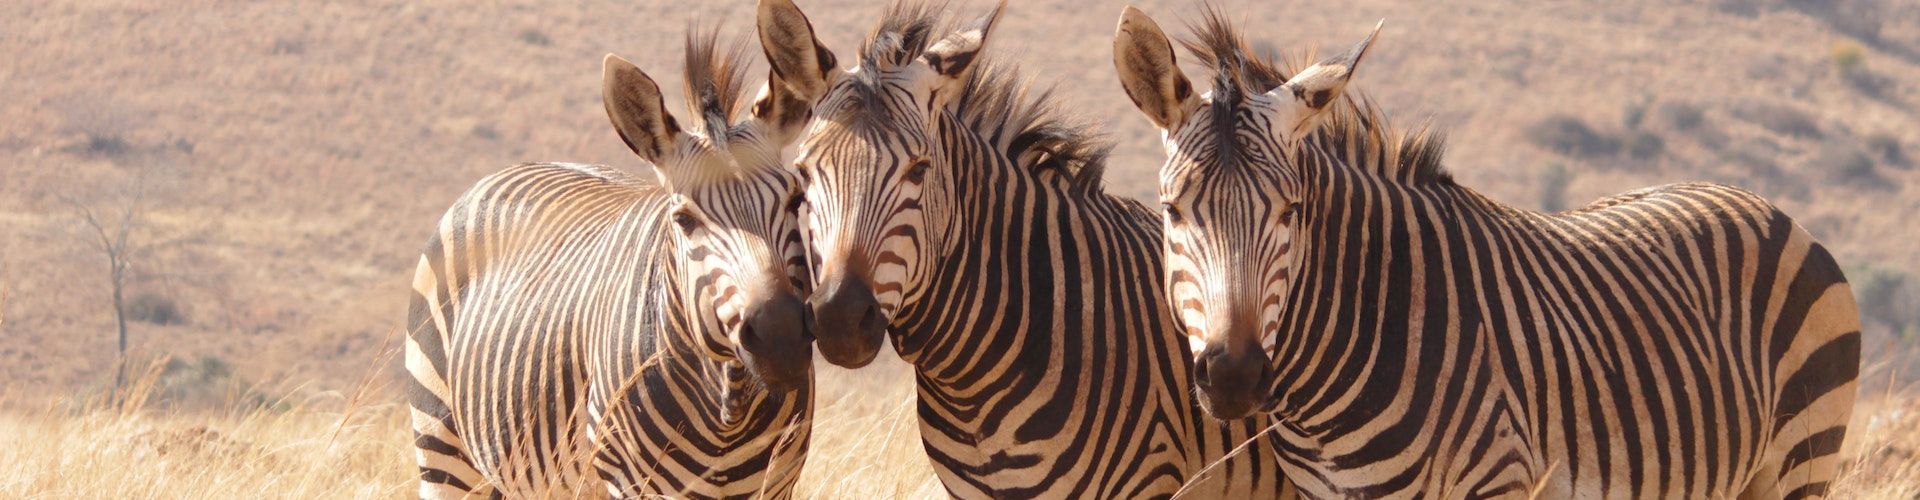 3 Zebras next to each other in of Tanzanias stunning national parks